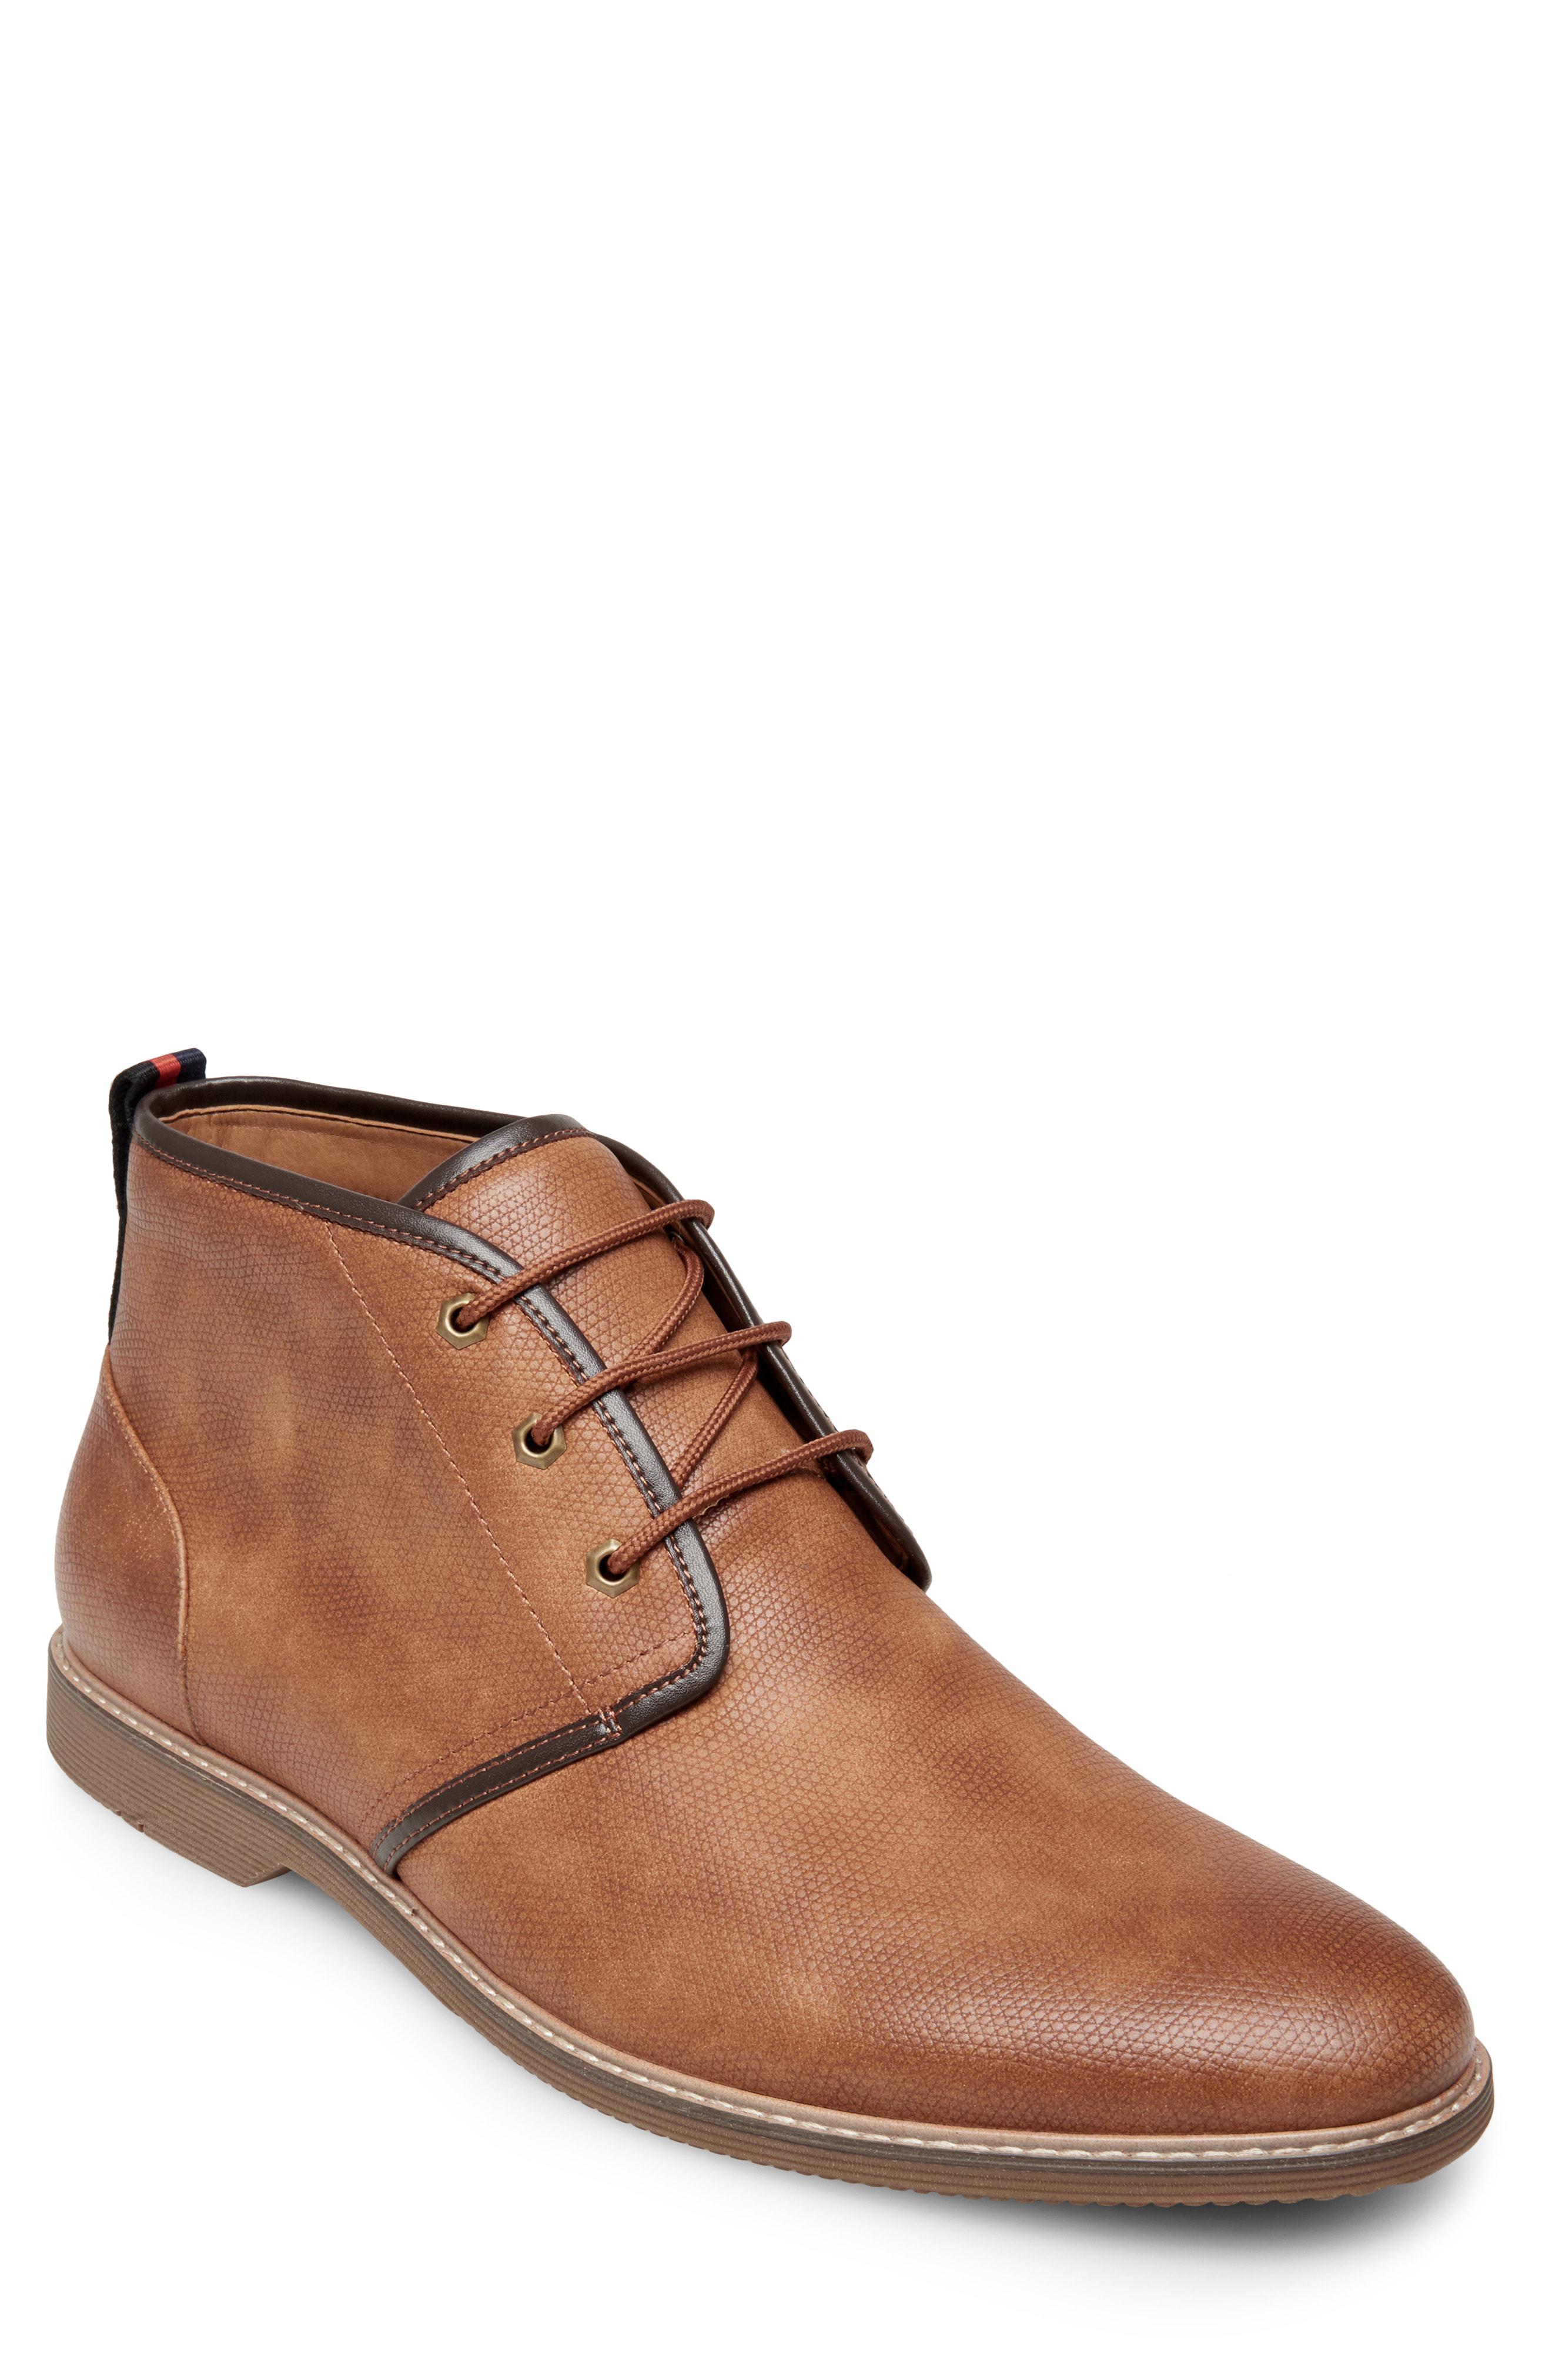 Steve Madden Leather Nurture Chukka Boot in Tan Leather (Brown) for Men ...